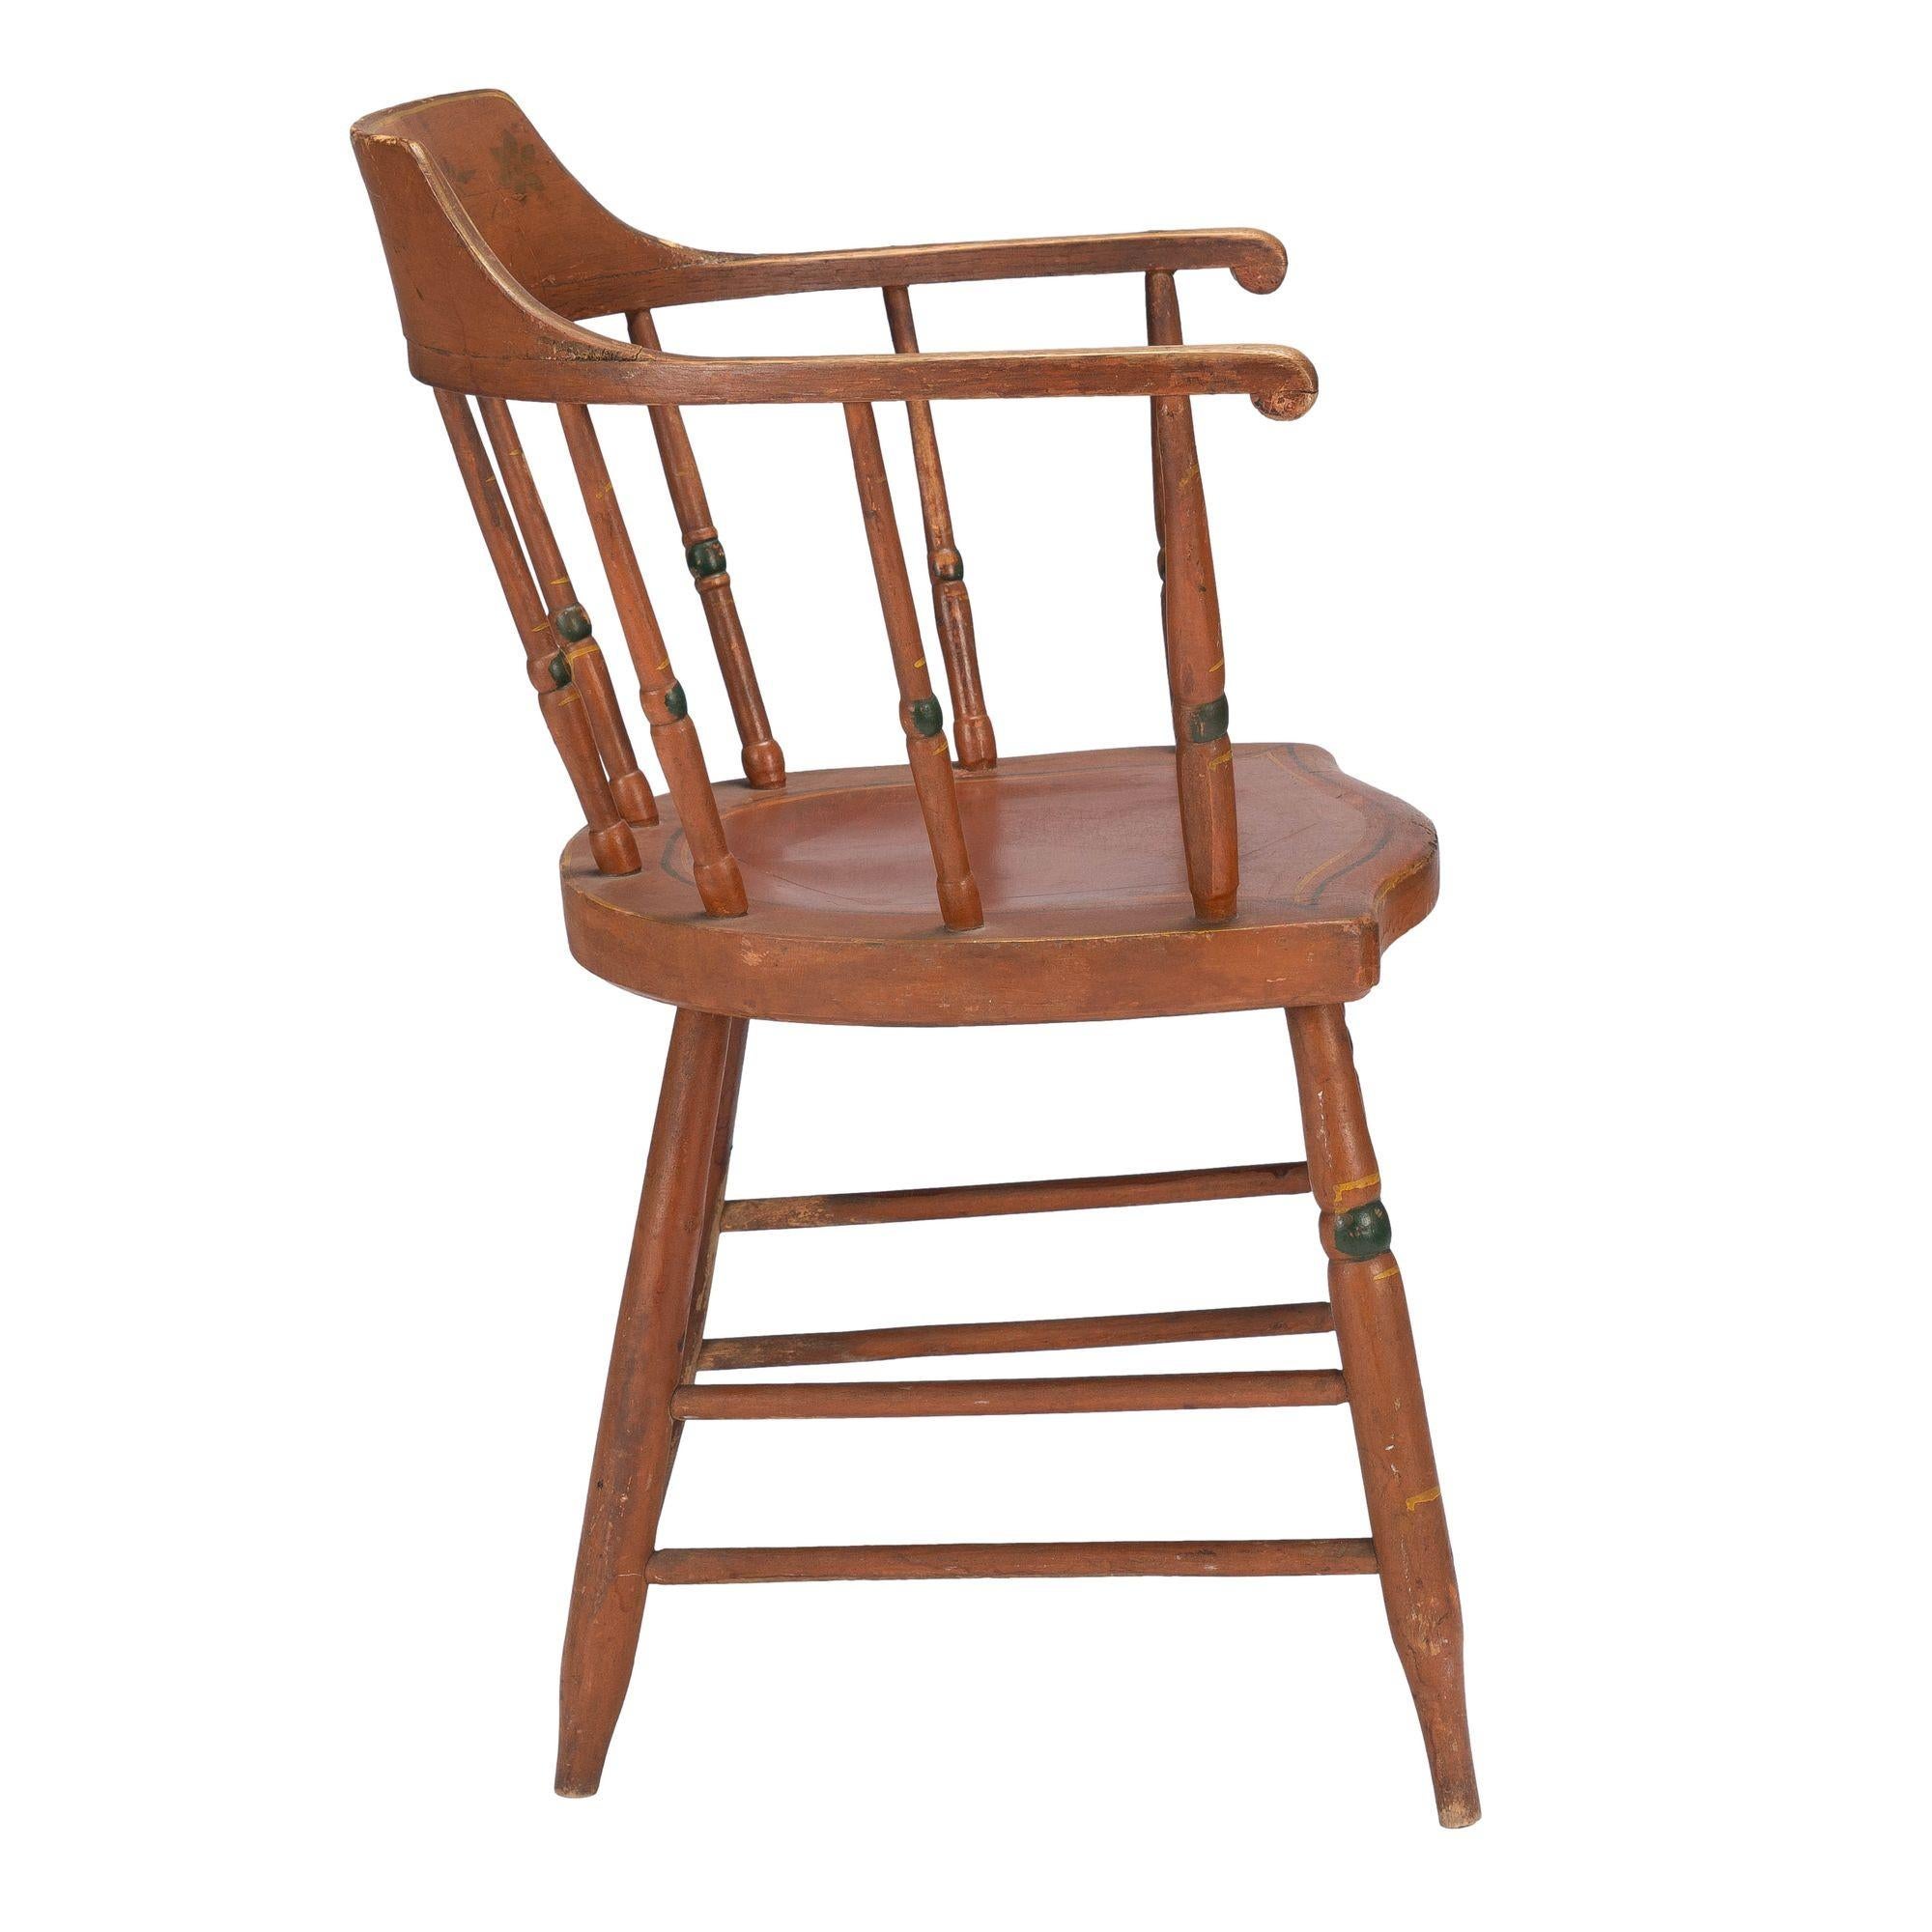 American Painted Windsor Captain's Chair, c. 1820 For Sale 1